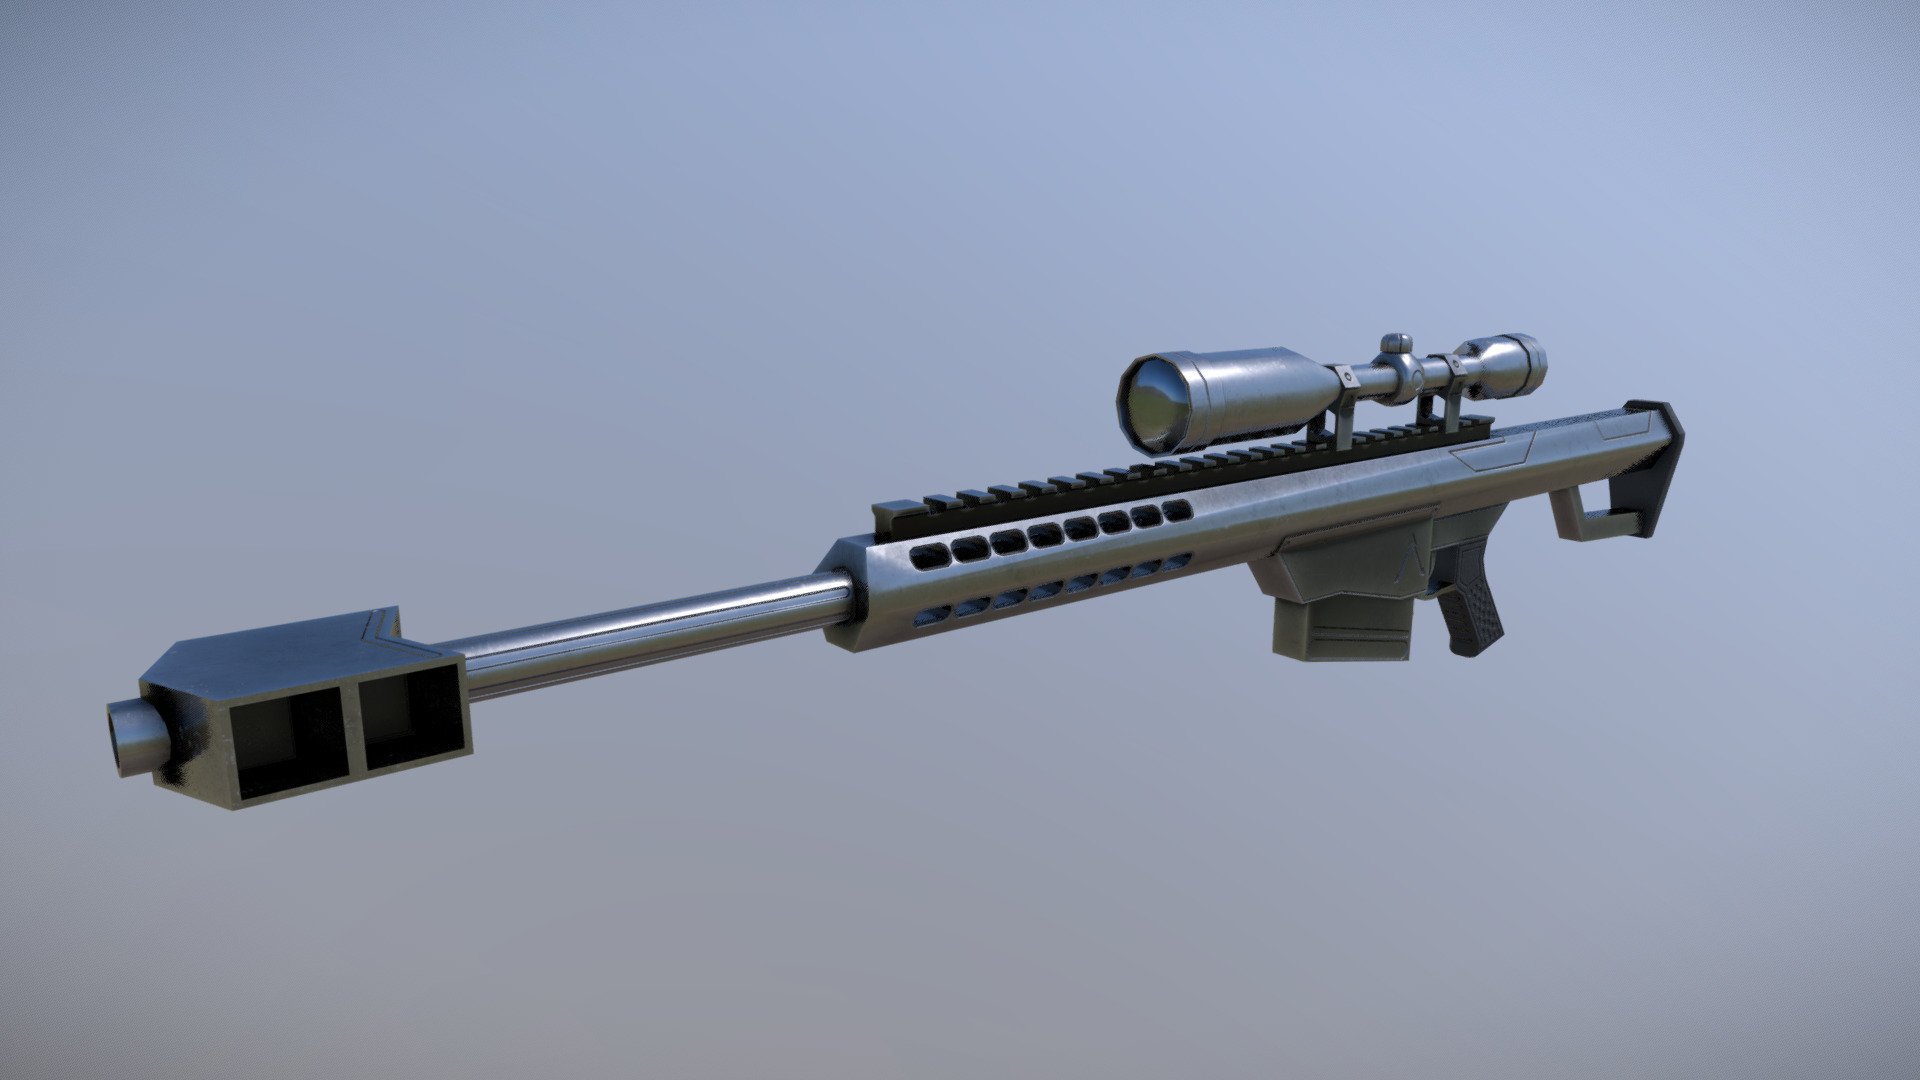 So I / my friend decided to model a Barrett M82A. Asked my friend too quickly shout out a sniper rifle. Here is the result of the sniper I modeled over the day 3d model